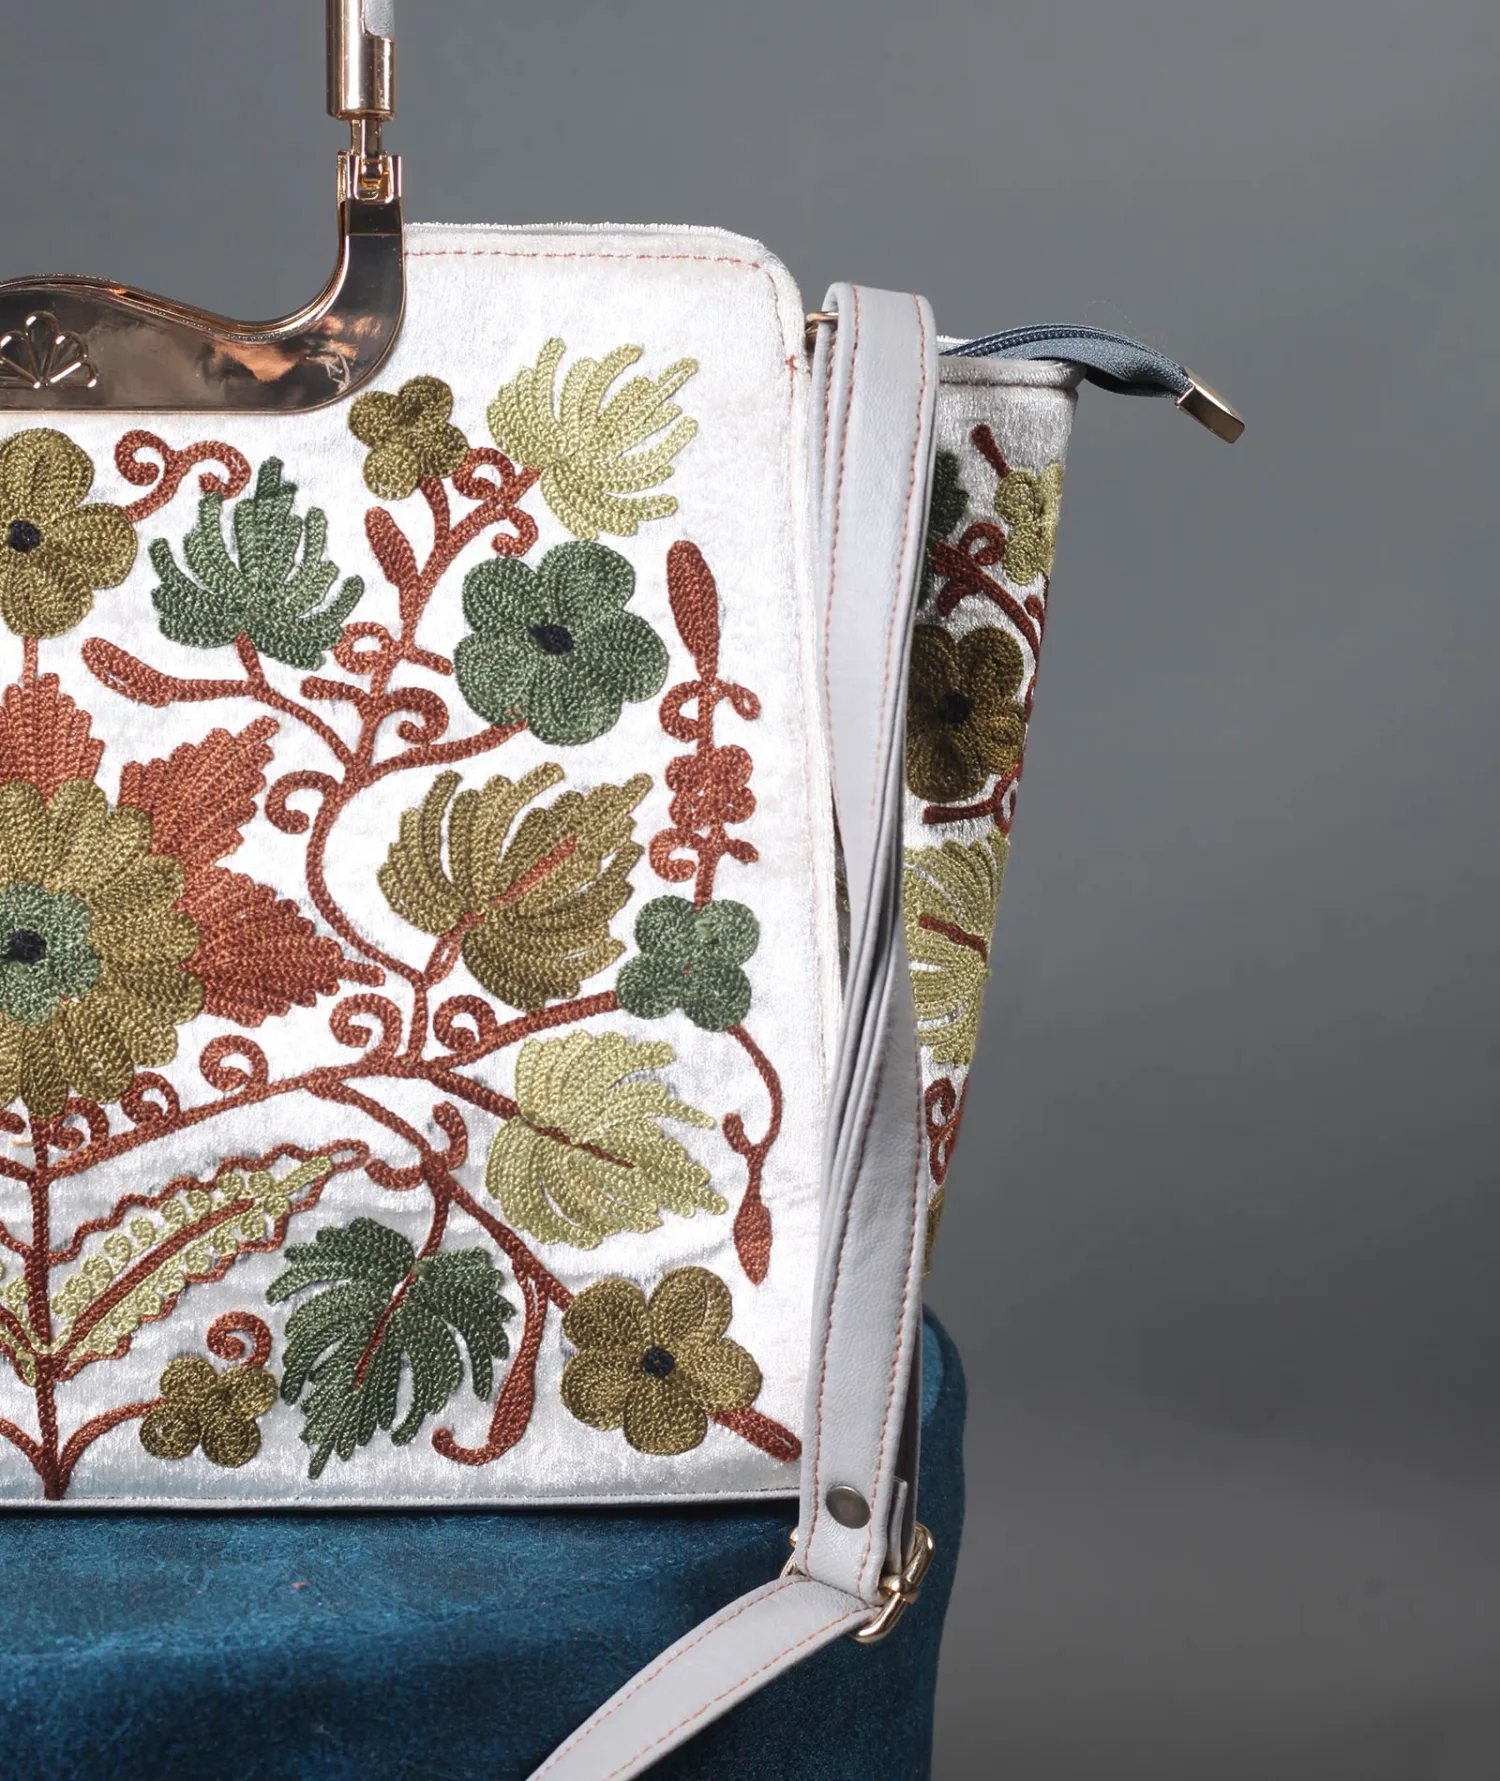 Floral Design Aari Embroidered White Hand Bag